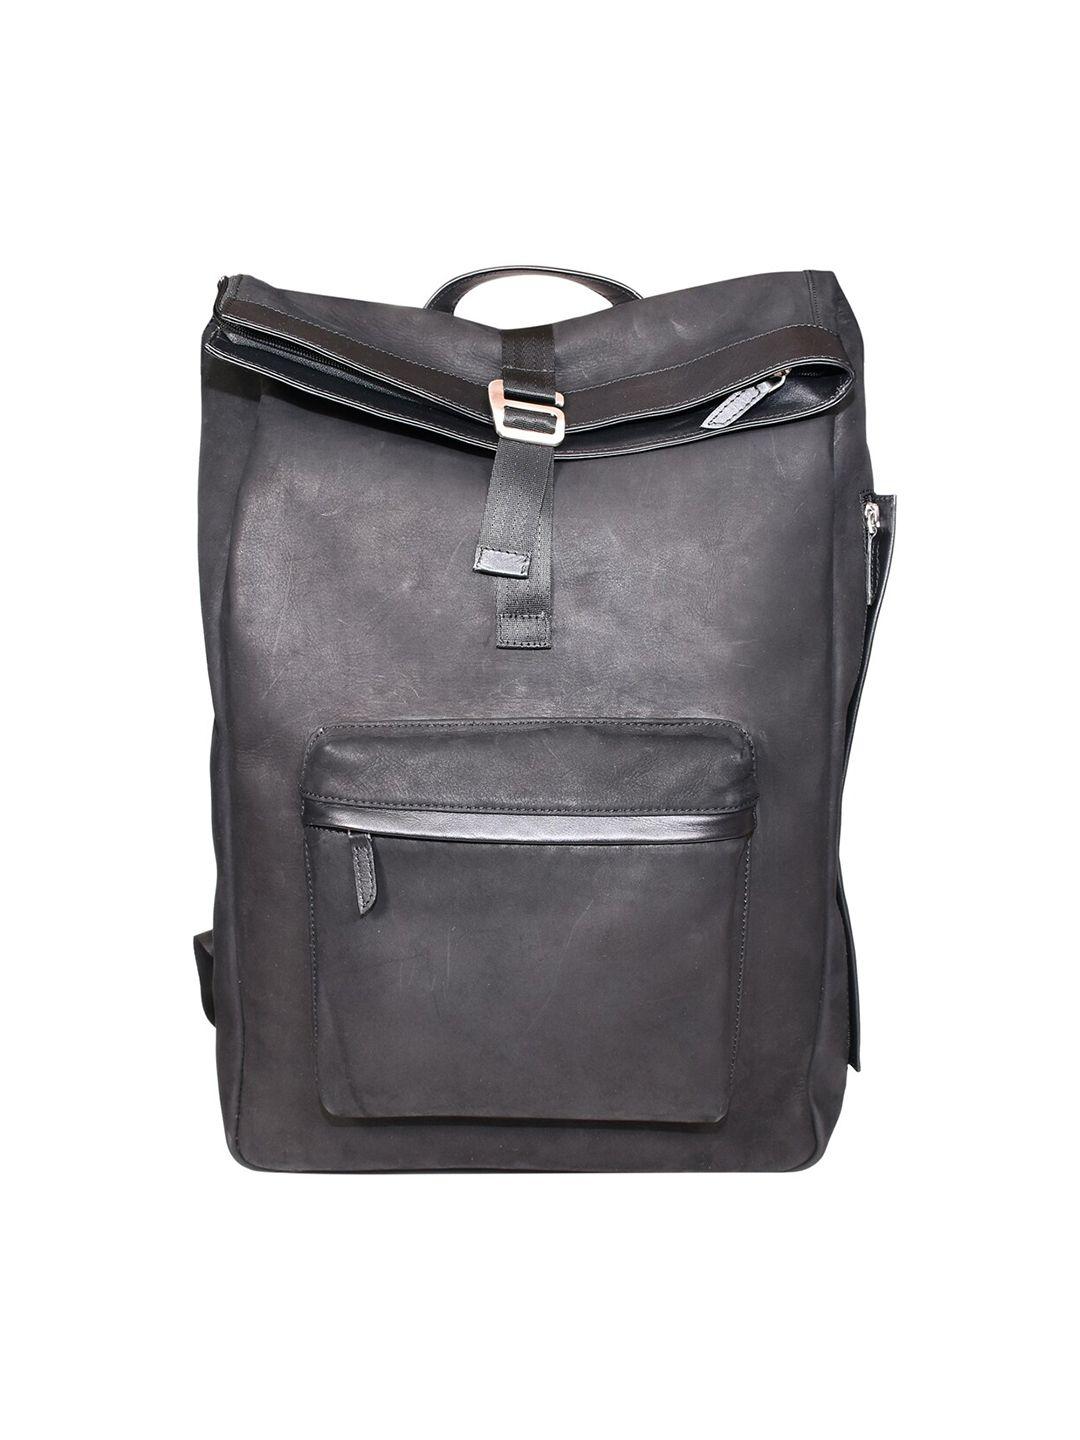 sassora men black contrast detail leather backpack with anti-theft